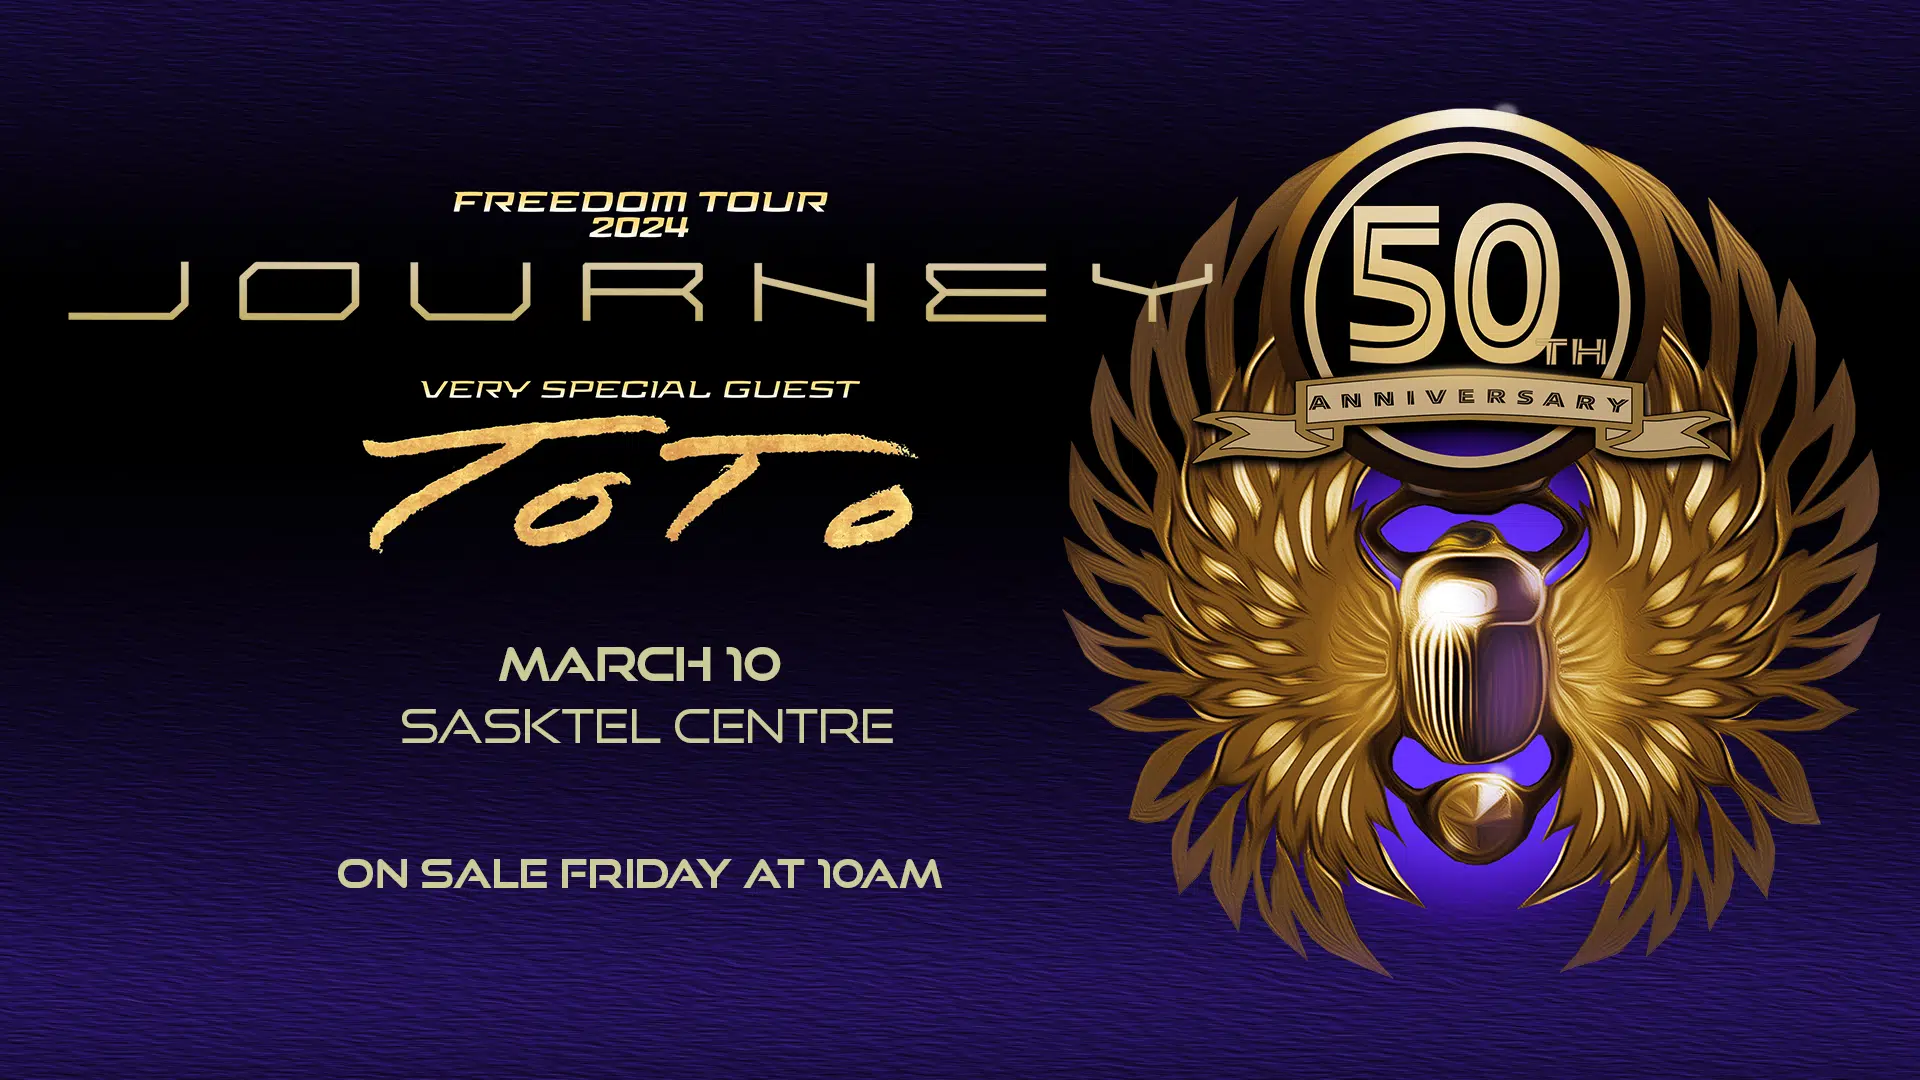 Journey’s Freedom Tour 2024 is coming to SaskTel Centre meadowlakeNOW